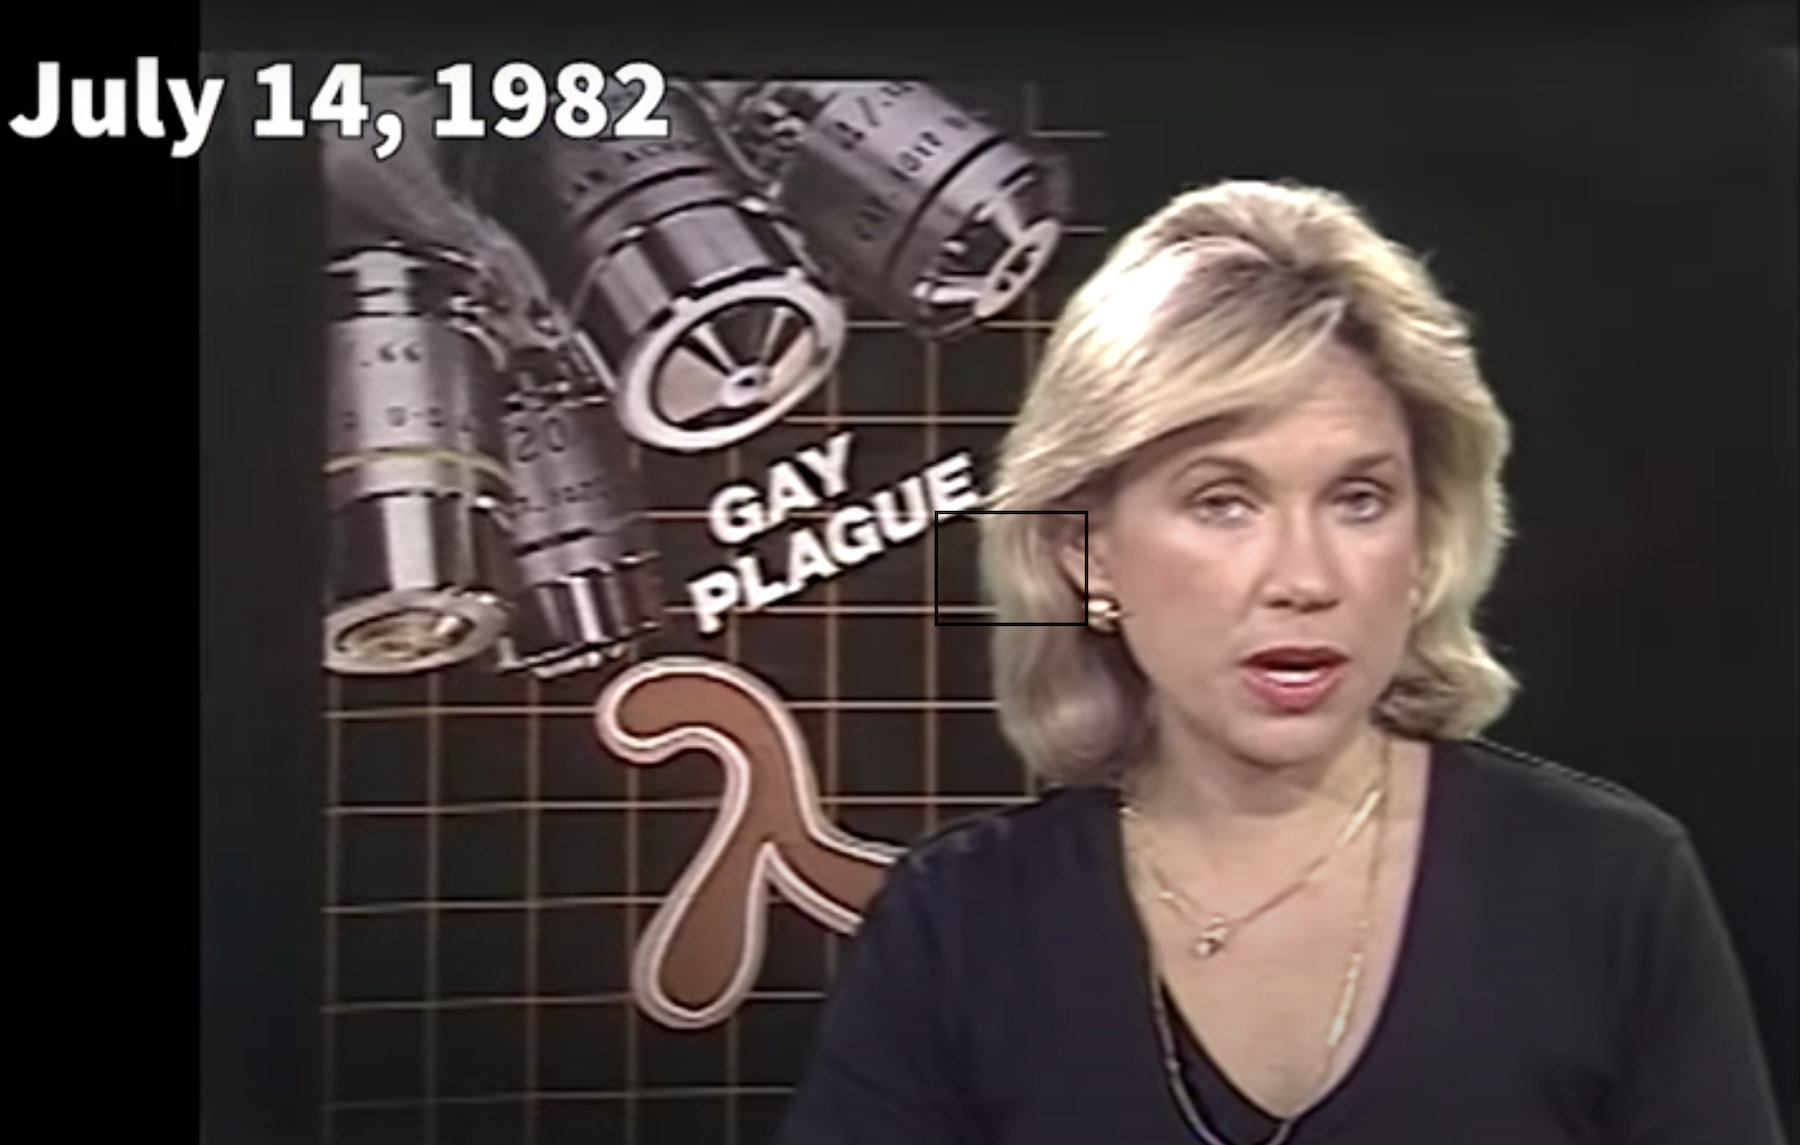 A screengrab of a 1982 Fox TV News segment covering the AIDS Epidemic. A white blonde woman in her 30’s with a manicured, slightly wavy bob, black blouse, and gold necklaces is caught mid-speech. Behind her, is the date ‘JULY 14, 1982’ text, the words ‘GAY PLAGUE’, and a backdrop featuring four silver medicinal canisters, a brown medical symbol, and a thin brown grid.